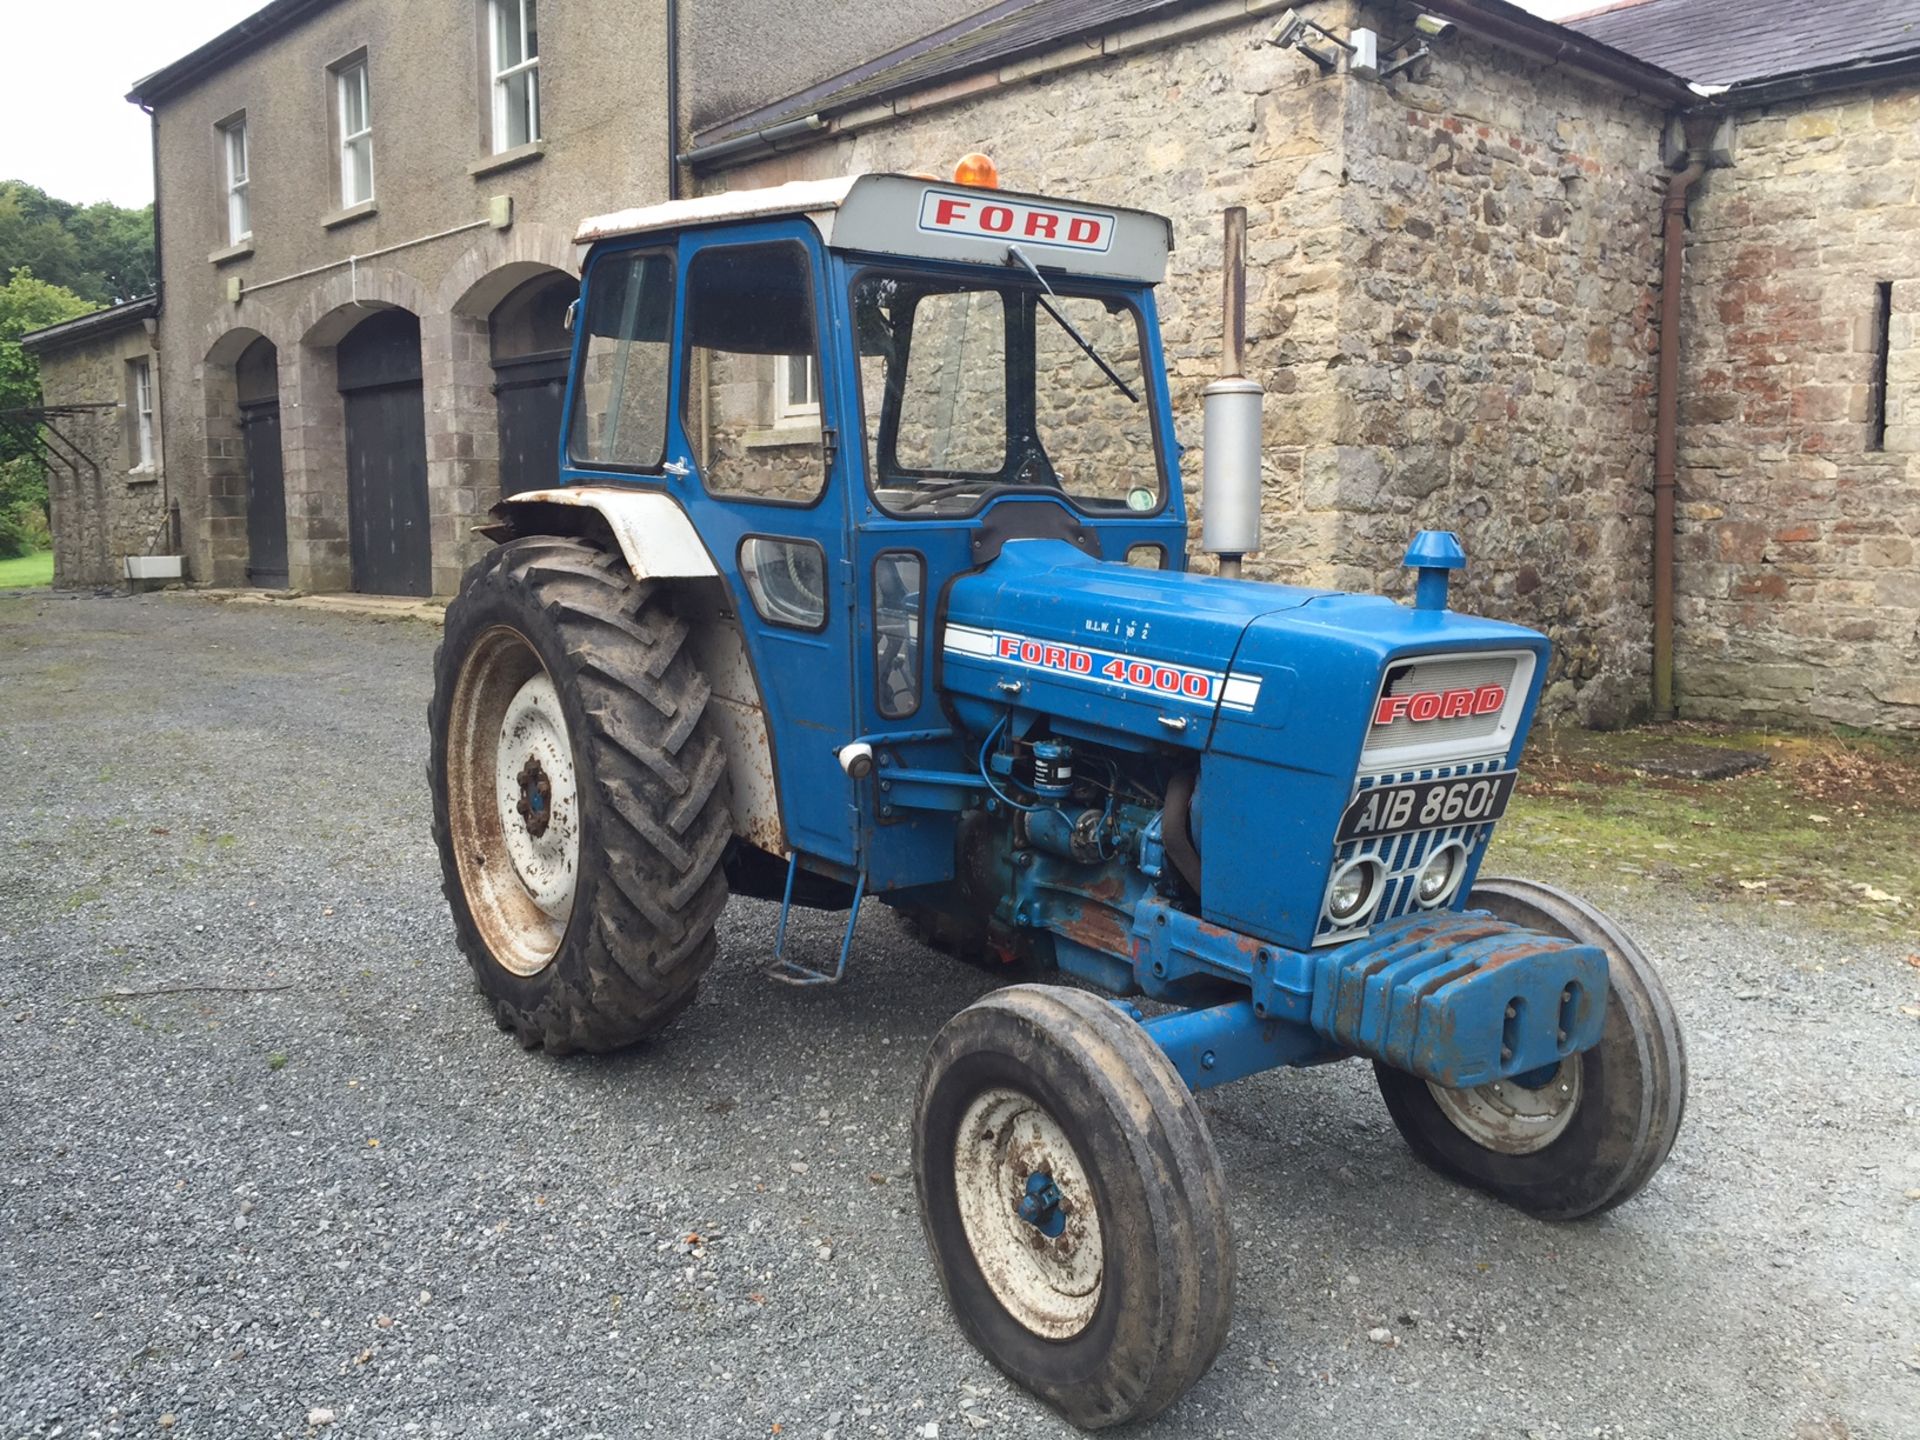 1974 FORD 4000 4cylinder diesel TRACTOR Reg No: AIB 8601 (Irish) Serial No: BP34662 Fitted with a